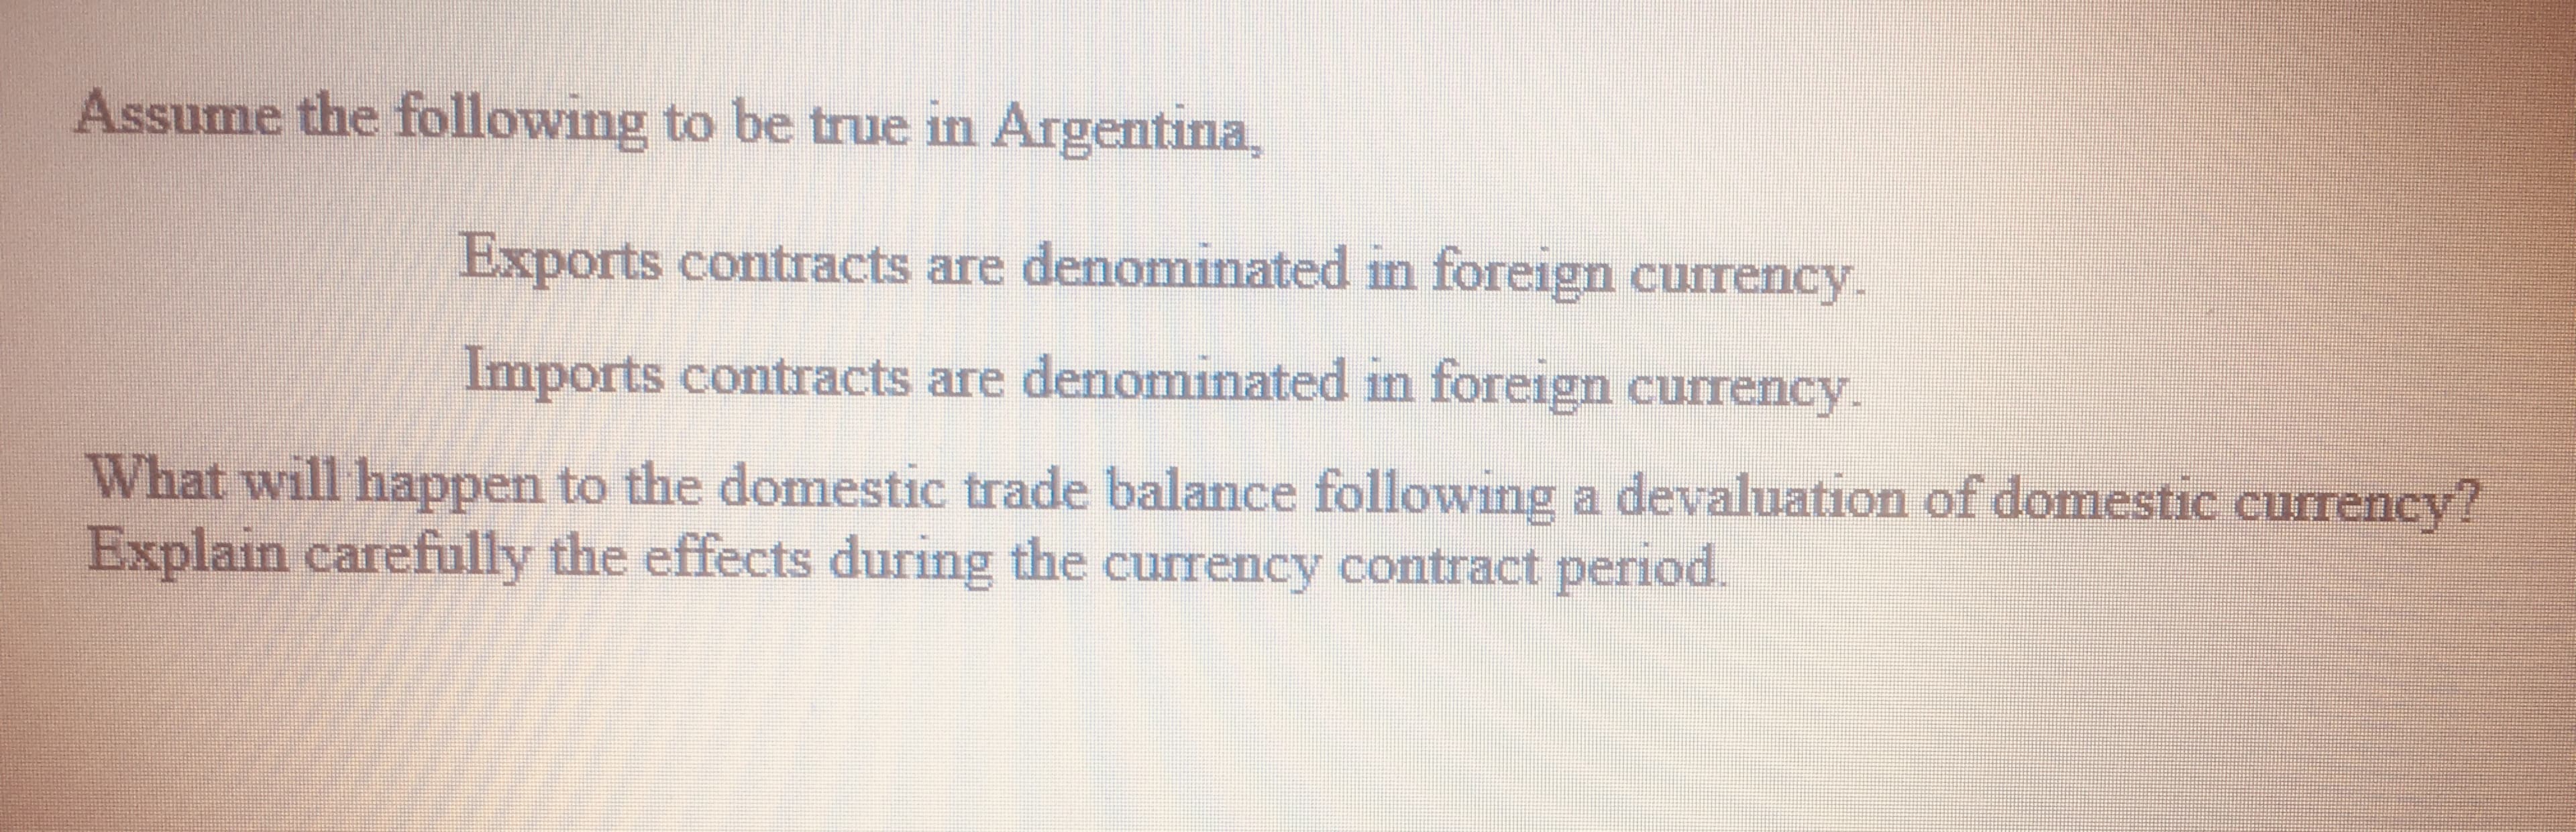 Assume the following to be true in Argentina,
Exports contracts are denominated in foreign currency.
Imports contracts are denominated in foreign currency.
